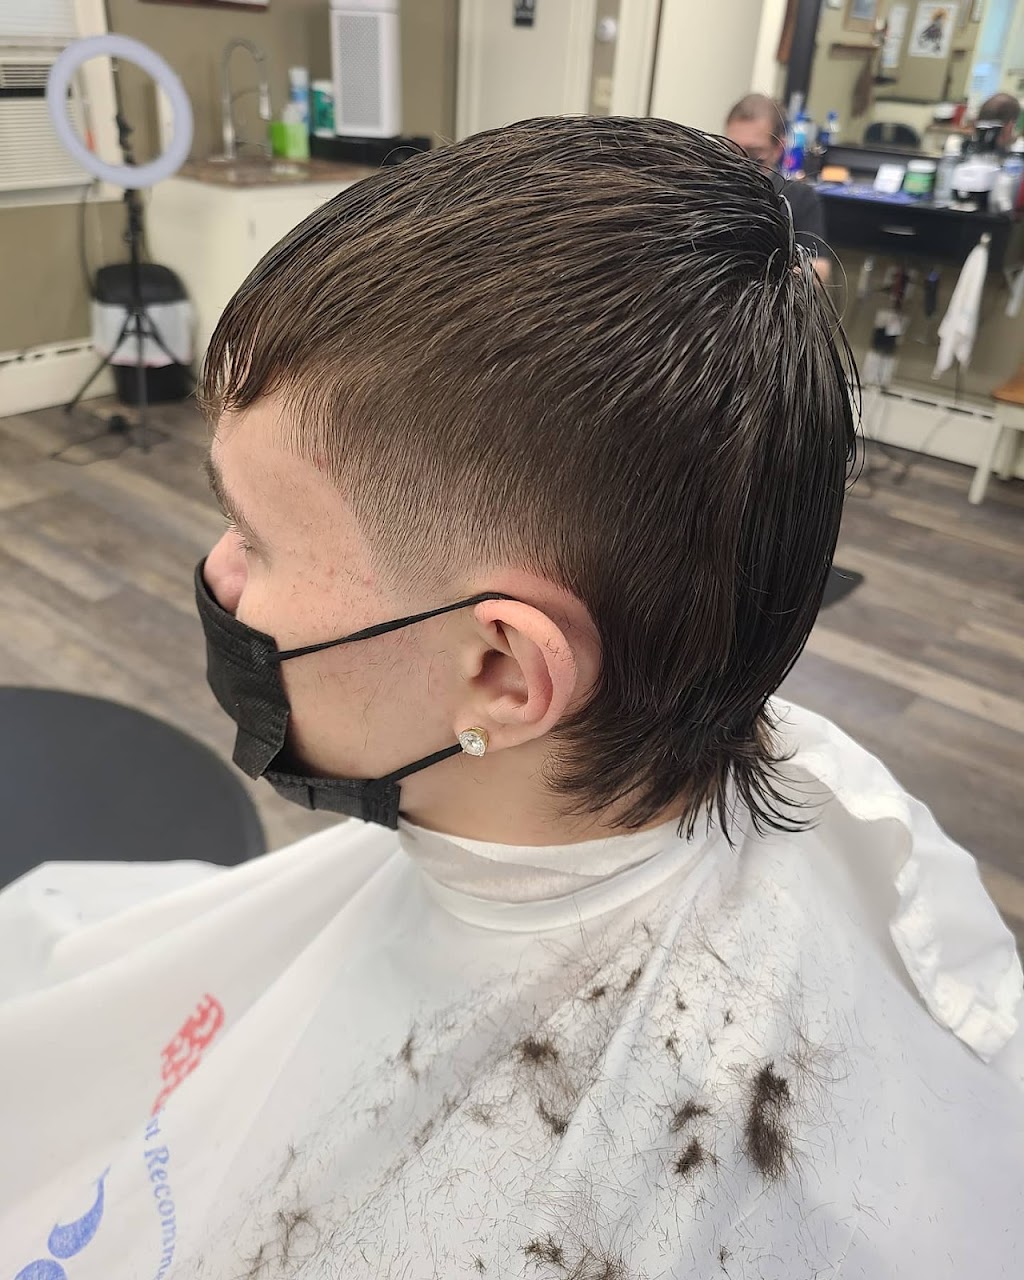 Joes Barbershop of Central Valley | 218 NY-32, Central Valley, NY 10917, USA | Phone: (845) 928-3128